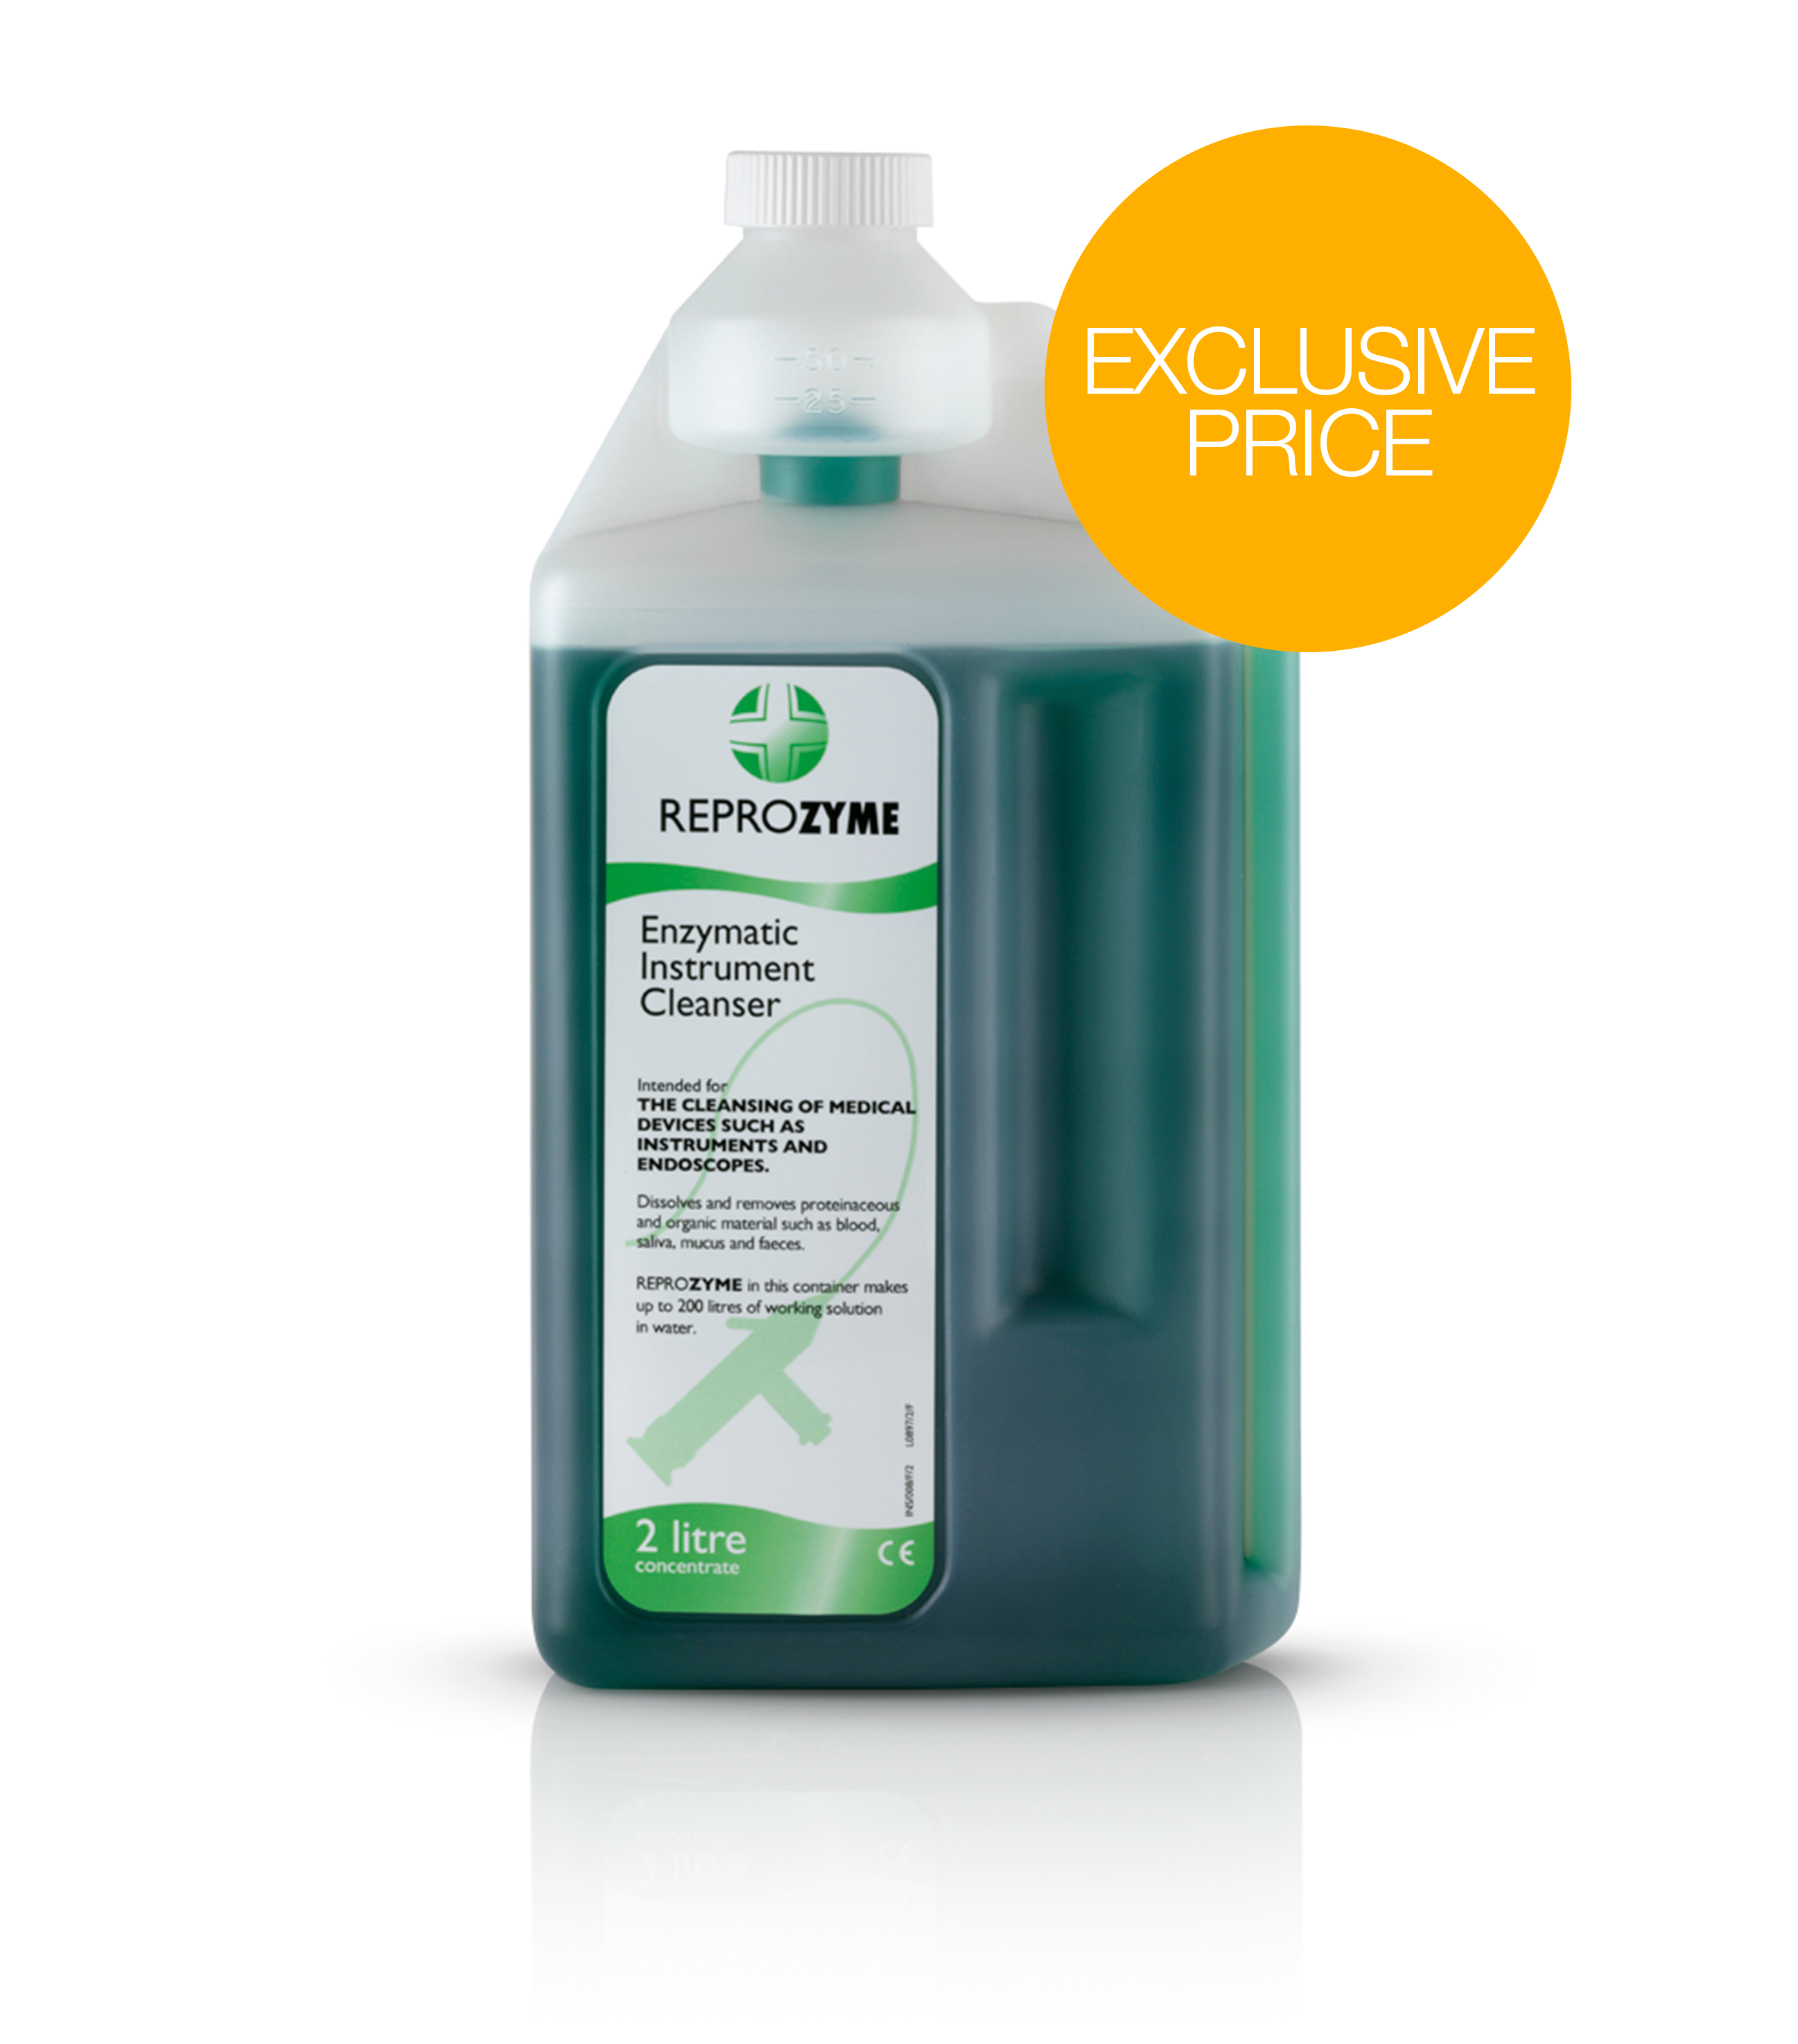 Reprozyme CE Enzymatic Instrument Cleaner 2L